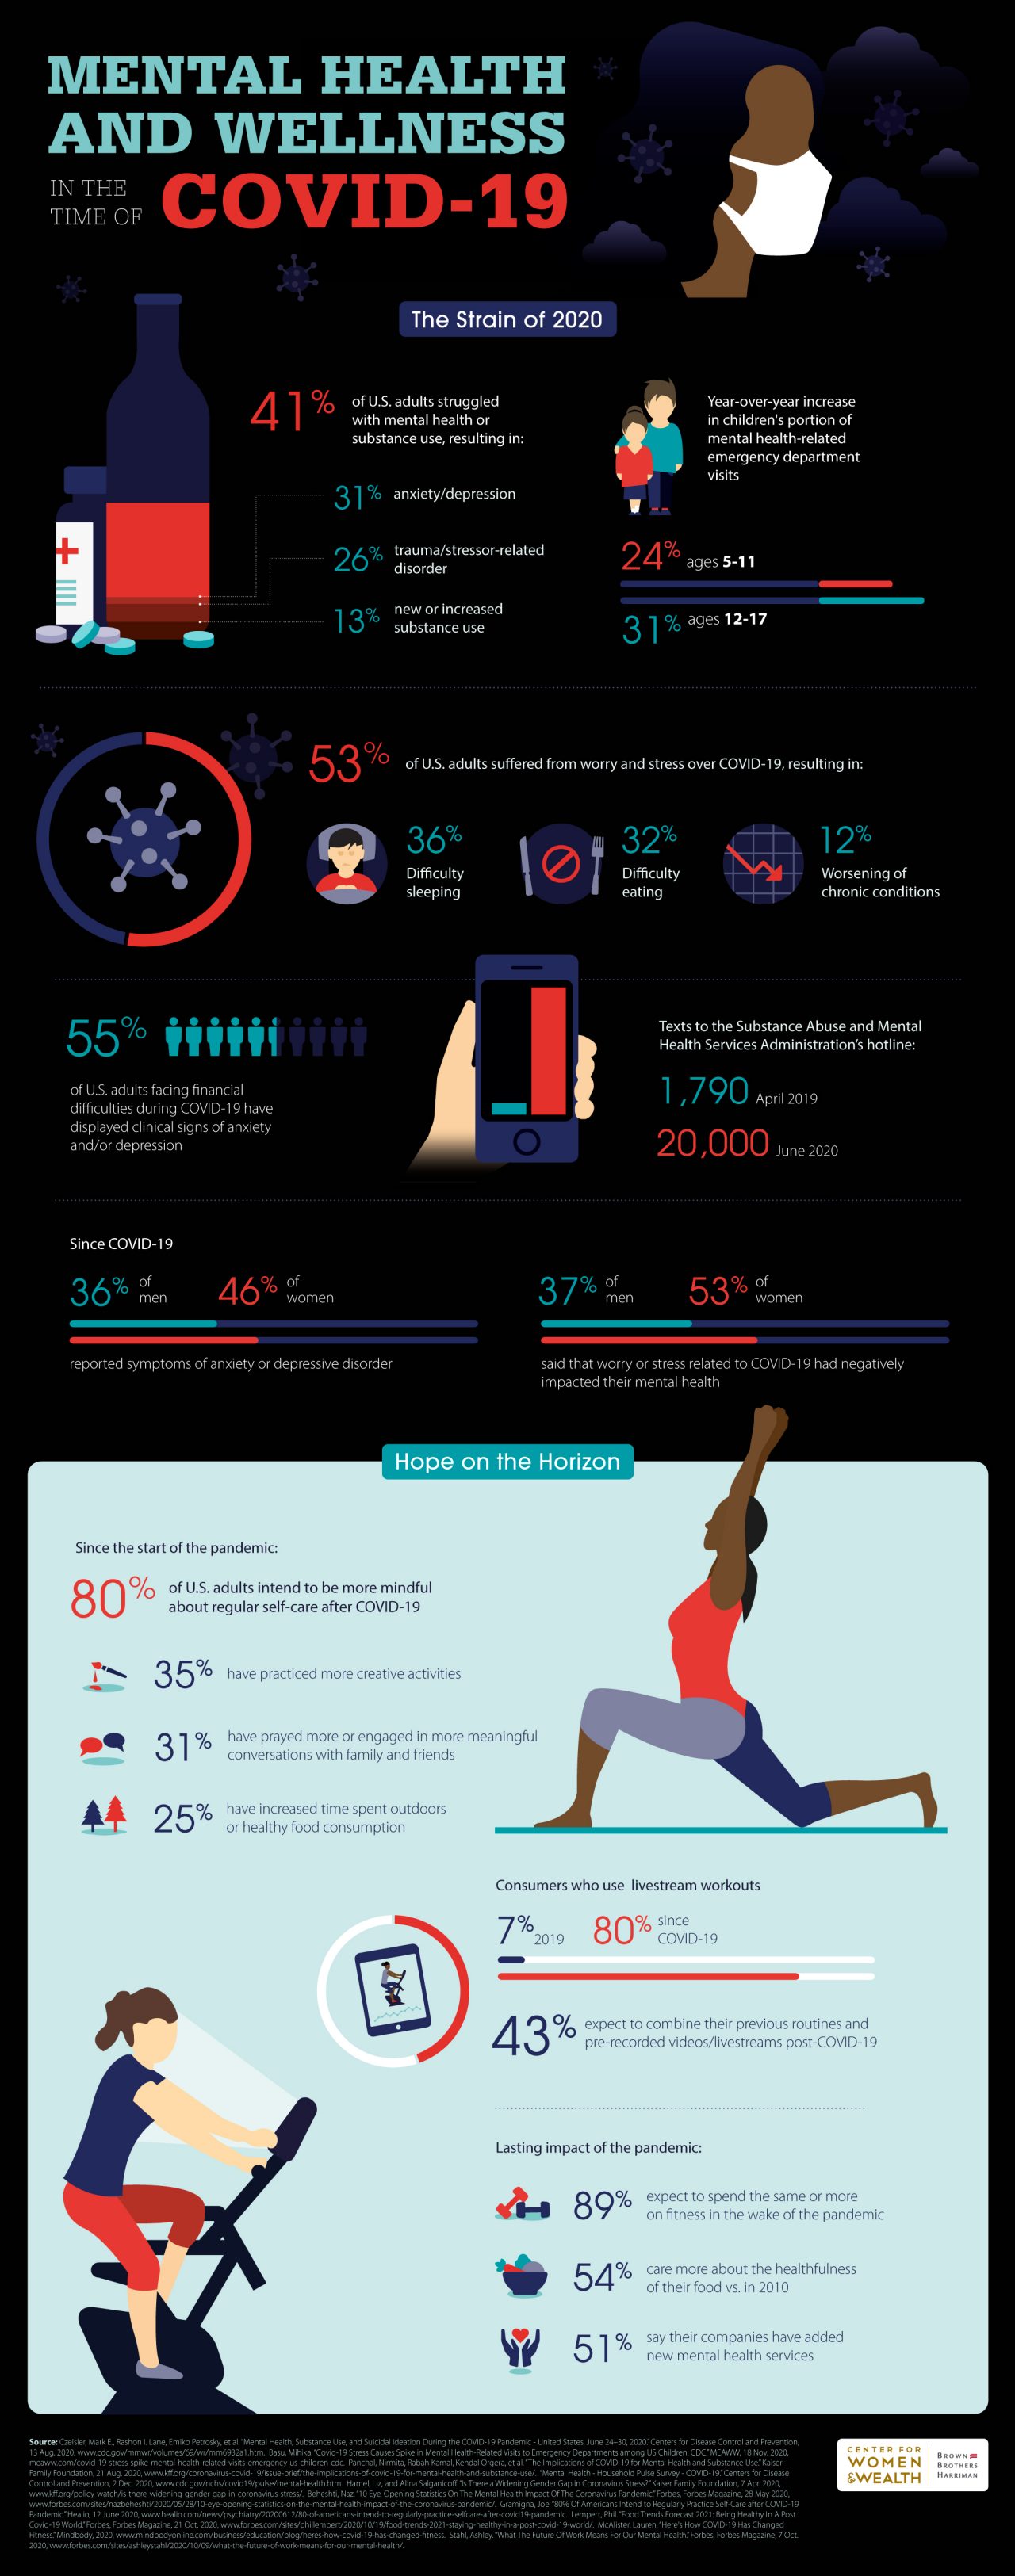 Infographic:  Mental Health and Wellness in the Time of COVID-19  The Strain of 2020  ·         41% of U.S. adults struggled with mental health or substance use, resulting in:  o    31% anxiety/depression  o    26% trauma/stressor-related disorder  o    13% new or increased substance use  ·         Year-over-year increase in children's portion of mental health-related emergency department visits:  o    24% ages 5-11; 31% ages 12-17  ·         53% of U.S. adults suffered from worry and stress over COVID-19, resulting in:  o    Difficulty sleeping (36%)  o    Difficulty eating (32%)  o    Worsening of chronic conditions (12%)  ·         55% of U.S. adults facing financial difficulties have displayed clinical signs of anxiety and/or depression  ·         Texts to the Substance Abuse and Mental Health Services Administration’s hotline: 1,790 in April 2019 vs. 20,000 in June 2020  ·         Since COVID-19:  o    46% of women and 36% of men reported symptoms of anxiety or depressive disorder  o    53% of women and 37% of men say that worry or stress related to COVID-19 has negatively impacted their mental health     Hope on the Horizon  ·         80% of U.S. adults intend to be more mindful about regular self-care practices after the pandemic[1]  o    Since COVID-19’s onset:  §   35% have practiced more creative activities  §   31% have prayed more or engaged in more meaningful conversations with family and friends  §   25% have increased time spent outdoors or healthy food consumption  ·         Consumers who use livestream workouts:  o    7% in 2019; 80% since COVID-19  ·         43% expect to combine their previous routines and pre-recorded videos/live streams post-COVID-19  ·         In the wake of the pandemic:  o    89% expect to spend the same or more on fitness post-lockdown restrictions  o    54% care more about the healthfulness of their food vs. in 2010  o    51% say their companies have added new mental health services     Source: Czeisler, Mark E., Rashon I. Lane, Emiko Petrosky, et al. “Mental Health, Substance Use, and Suicidal Ideation During the COVID-19 Pandemic - United States, June 24–30, 2020.” Centers for Disease Control and Prevention, 13 Aug. 2020, www.cdc.gov/mmwr/volumes/69/wr/mm6932a1.htm. Basu, Mihika. “Covid-19 Stress Causes Spike in Mental Health-Related Visits to Emergency Departments among US Children: CDC.” MEAWW, 18 Nov. 2020, meaww.com/covid-19-stress-spike-mental-health-related-visits-emergency-us-children-cdc. Panchal, Nirmita, Rabah Kamal, Kendal Orgera, et al. “The Implications of COVID-19 for Mental Health and Substance Use.” Kaiser Family Foundation, 21 Aug. 2020, www.k­.org/coronavirus-covid-19/issue-brief/the-implications-of-covid-19-for-mental-health-and-substance-use/. “Mental Health - Household Pulse Survey - COVID-19.” Centers for Disease Control and Prevention, 2 Dec. 2020, www.cdc.gov/nchs/covid19/pulse/mental-health.htm. Hamel, Liz, and Alina Salganico­. “Is There a Widening Gender Gap in Coronavirus Stress?” Kaiser Family Foundation, 7 Apr. 2020, www.k­.org/policy-watch/is-there-widening-gender-gap-in-coronavirus-stress/. Beheshti, Naz. “10 Eye-Opening Statistics On The Mental Health Impact Of The Coronavirus Pandemic.” Forbes, Forbes Magazine, 28 May 2020, www.forbes.com/sites/nazbeheshti/2020/05/28/10-eye-opening-statistics-on-the-mental-health-impact-of-the-coronavirus-pandemic/. Gramigna, Joe. “80% Of Americans Intend to Regularly Practice Self-Care after COVID-19 Pandemic.” Healio, 12 June 2020, www.healio.com/news/psychiatry/20200612/80-of-americans-intend-to-regularly-practice-selfcare-after-covid19-pandemic. Lempert, Phil. “Food Trends Forecast 2021: Being Healthy In A Post Covid-19 World.” Forbes, Forbes Magazine, 21 Oct. 2020, www.forbes.com/sites/phillempert/2020/10/19/food-trends-2021-staying-healthy-in-a-post-covid-19-world/. McAlister, Lauren. “Here's How COVID-19 Has Changed Fitness.” Mindbody, 2020, www.mindbodyonline.com/business/education/blog/heres-how-covid-19-has-changed-‑tness. Stahl, Ashley. “What The Future Of Work Means For Our Mental Health.” Forbes, 